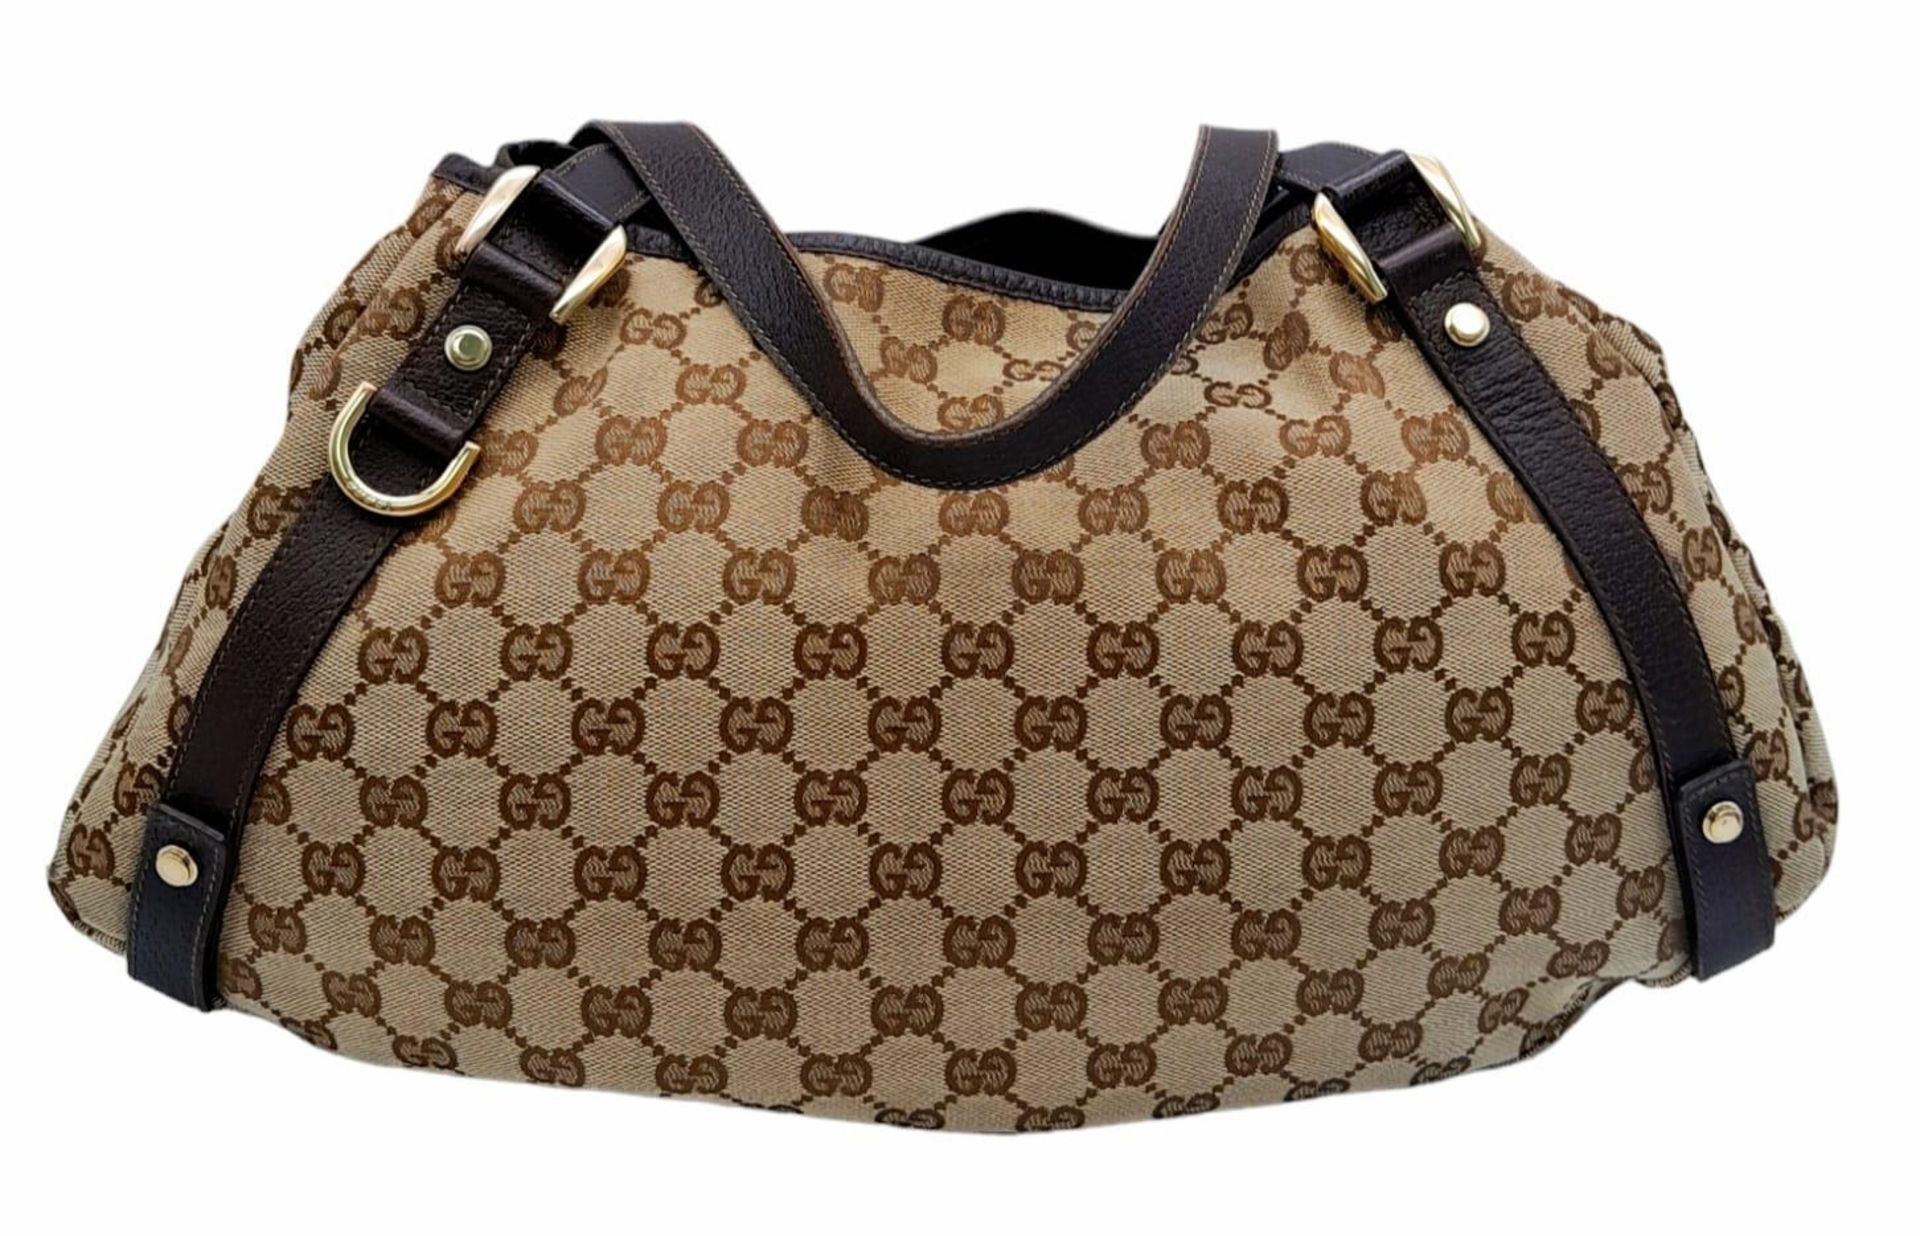 A Gucci Brown Monogram 'Abbey' Shoulder Bag. Canvas exterior with leather trim, gold-toned hardware, - Image 2 of 8